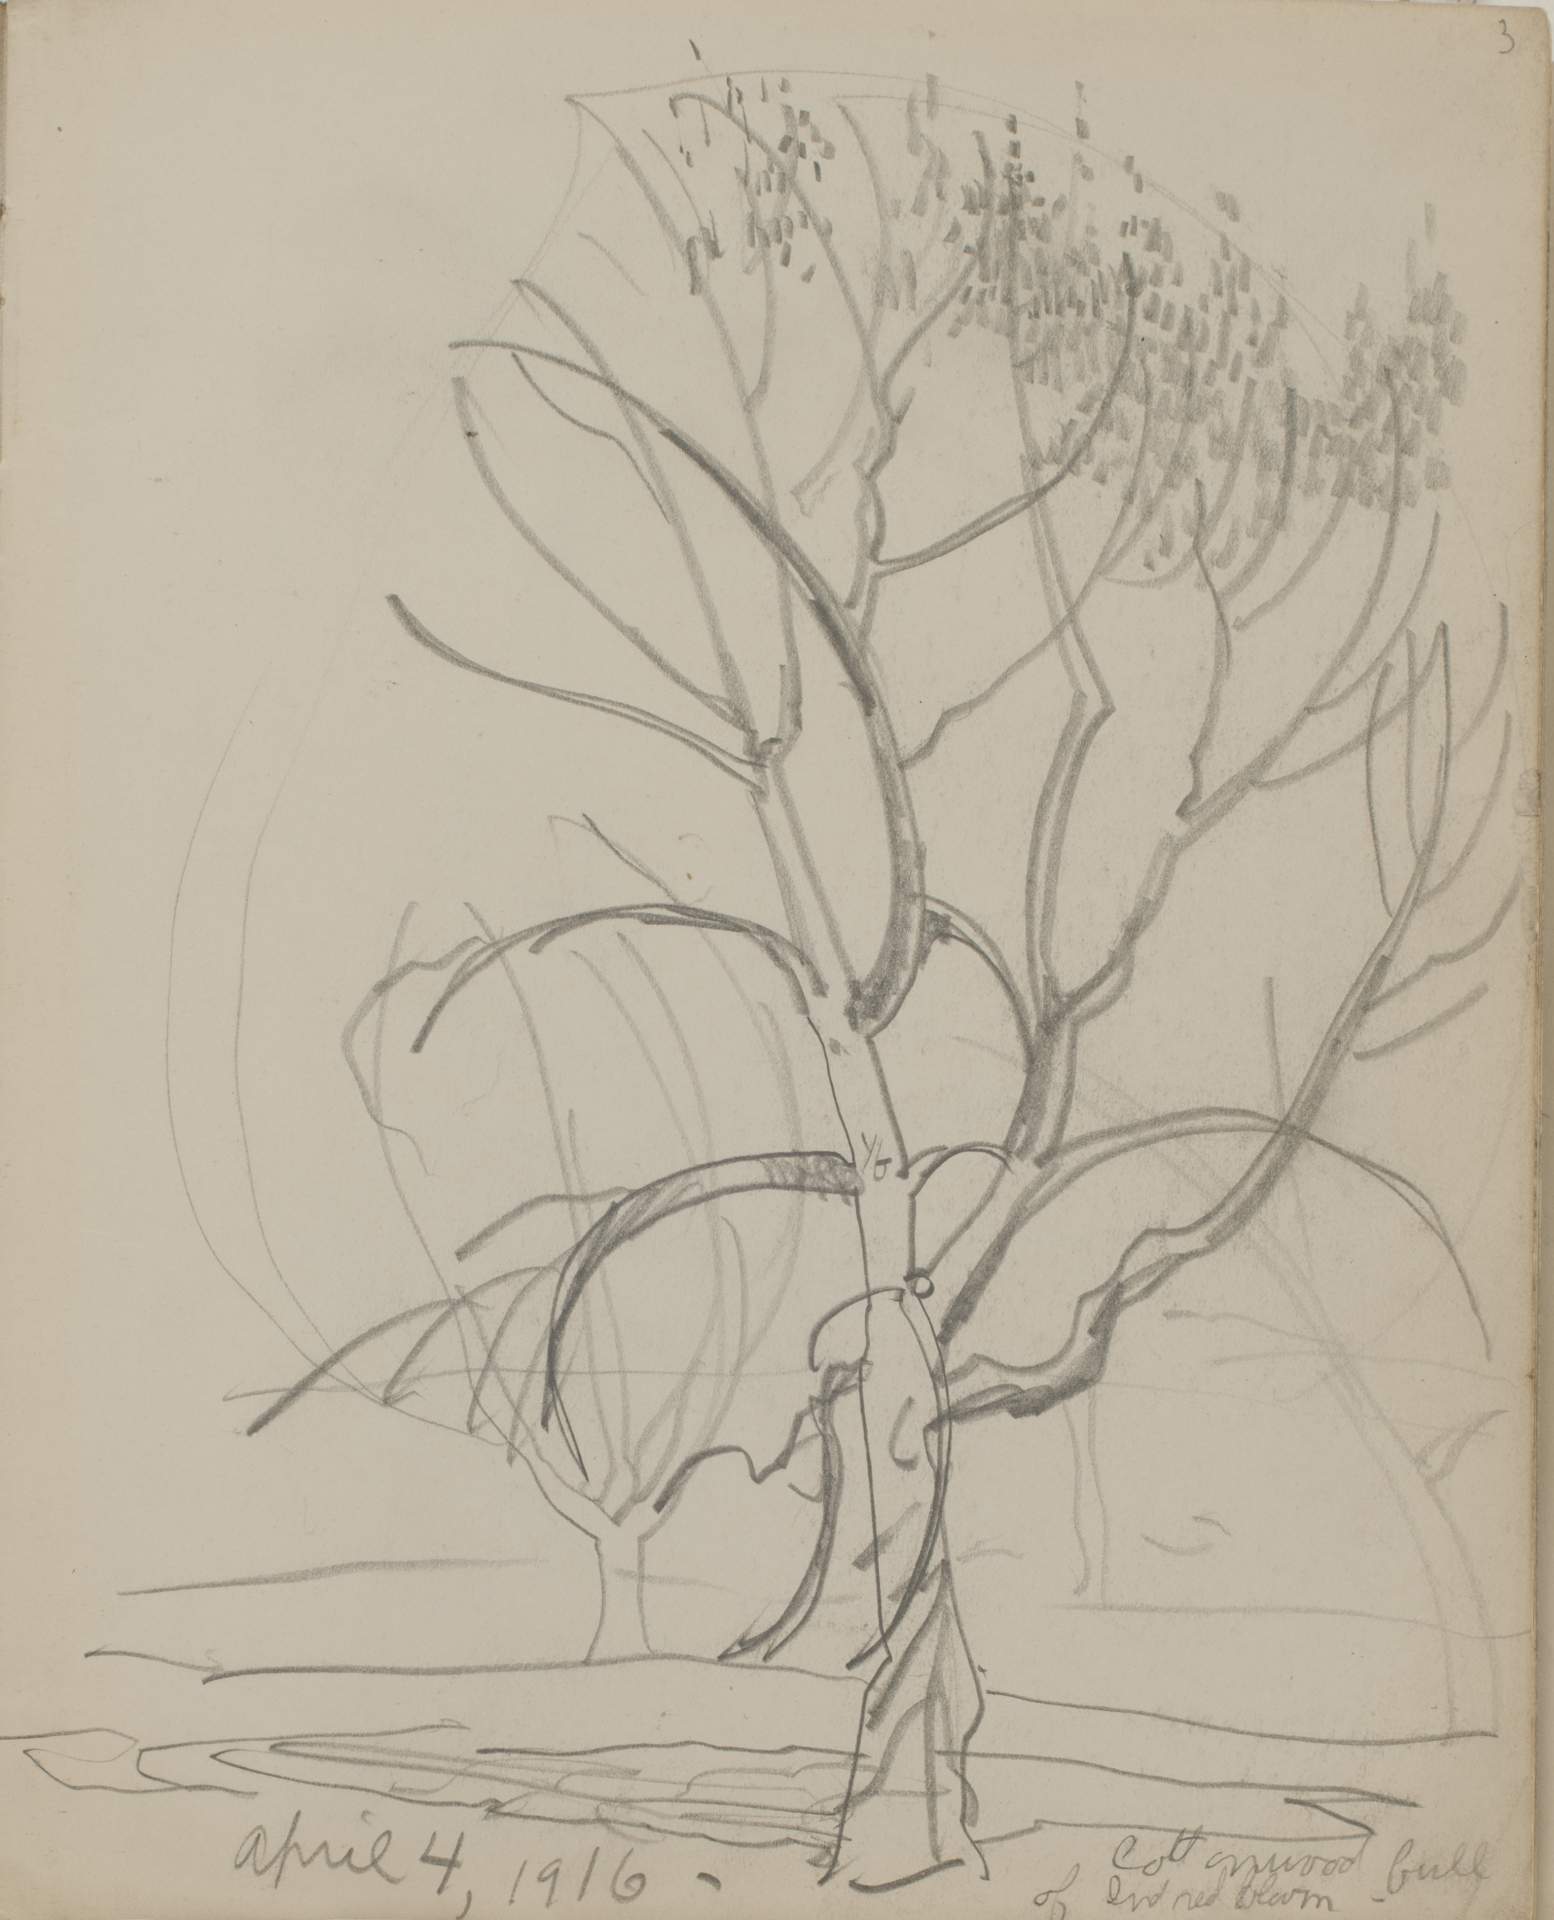 Untitled (sketch of trees with leaves and shadows)